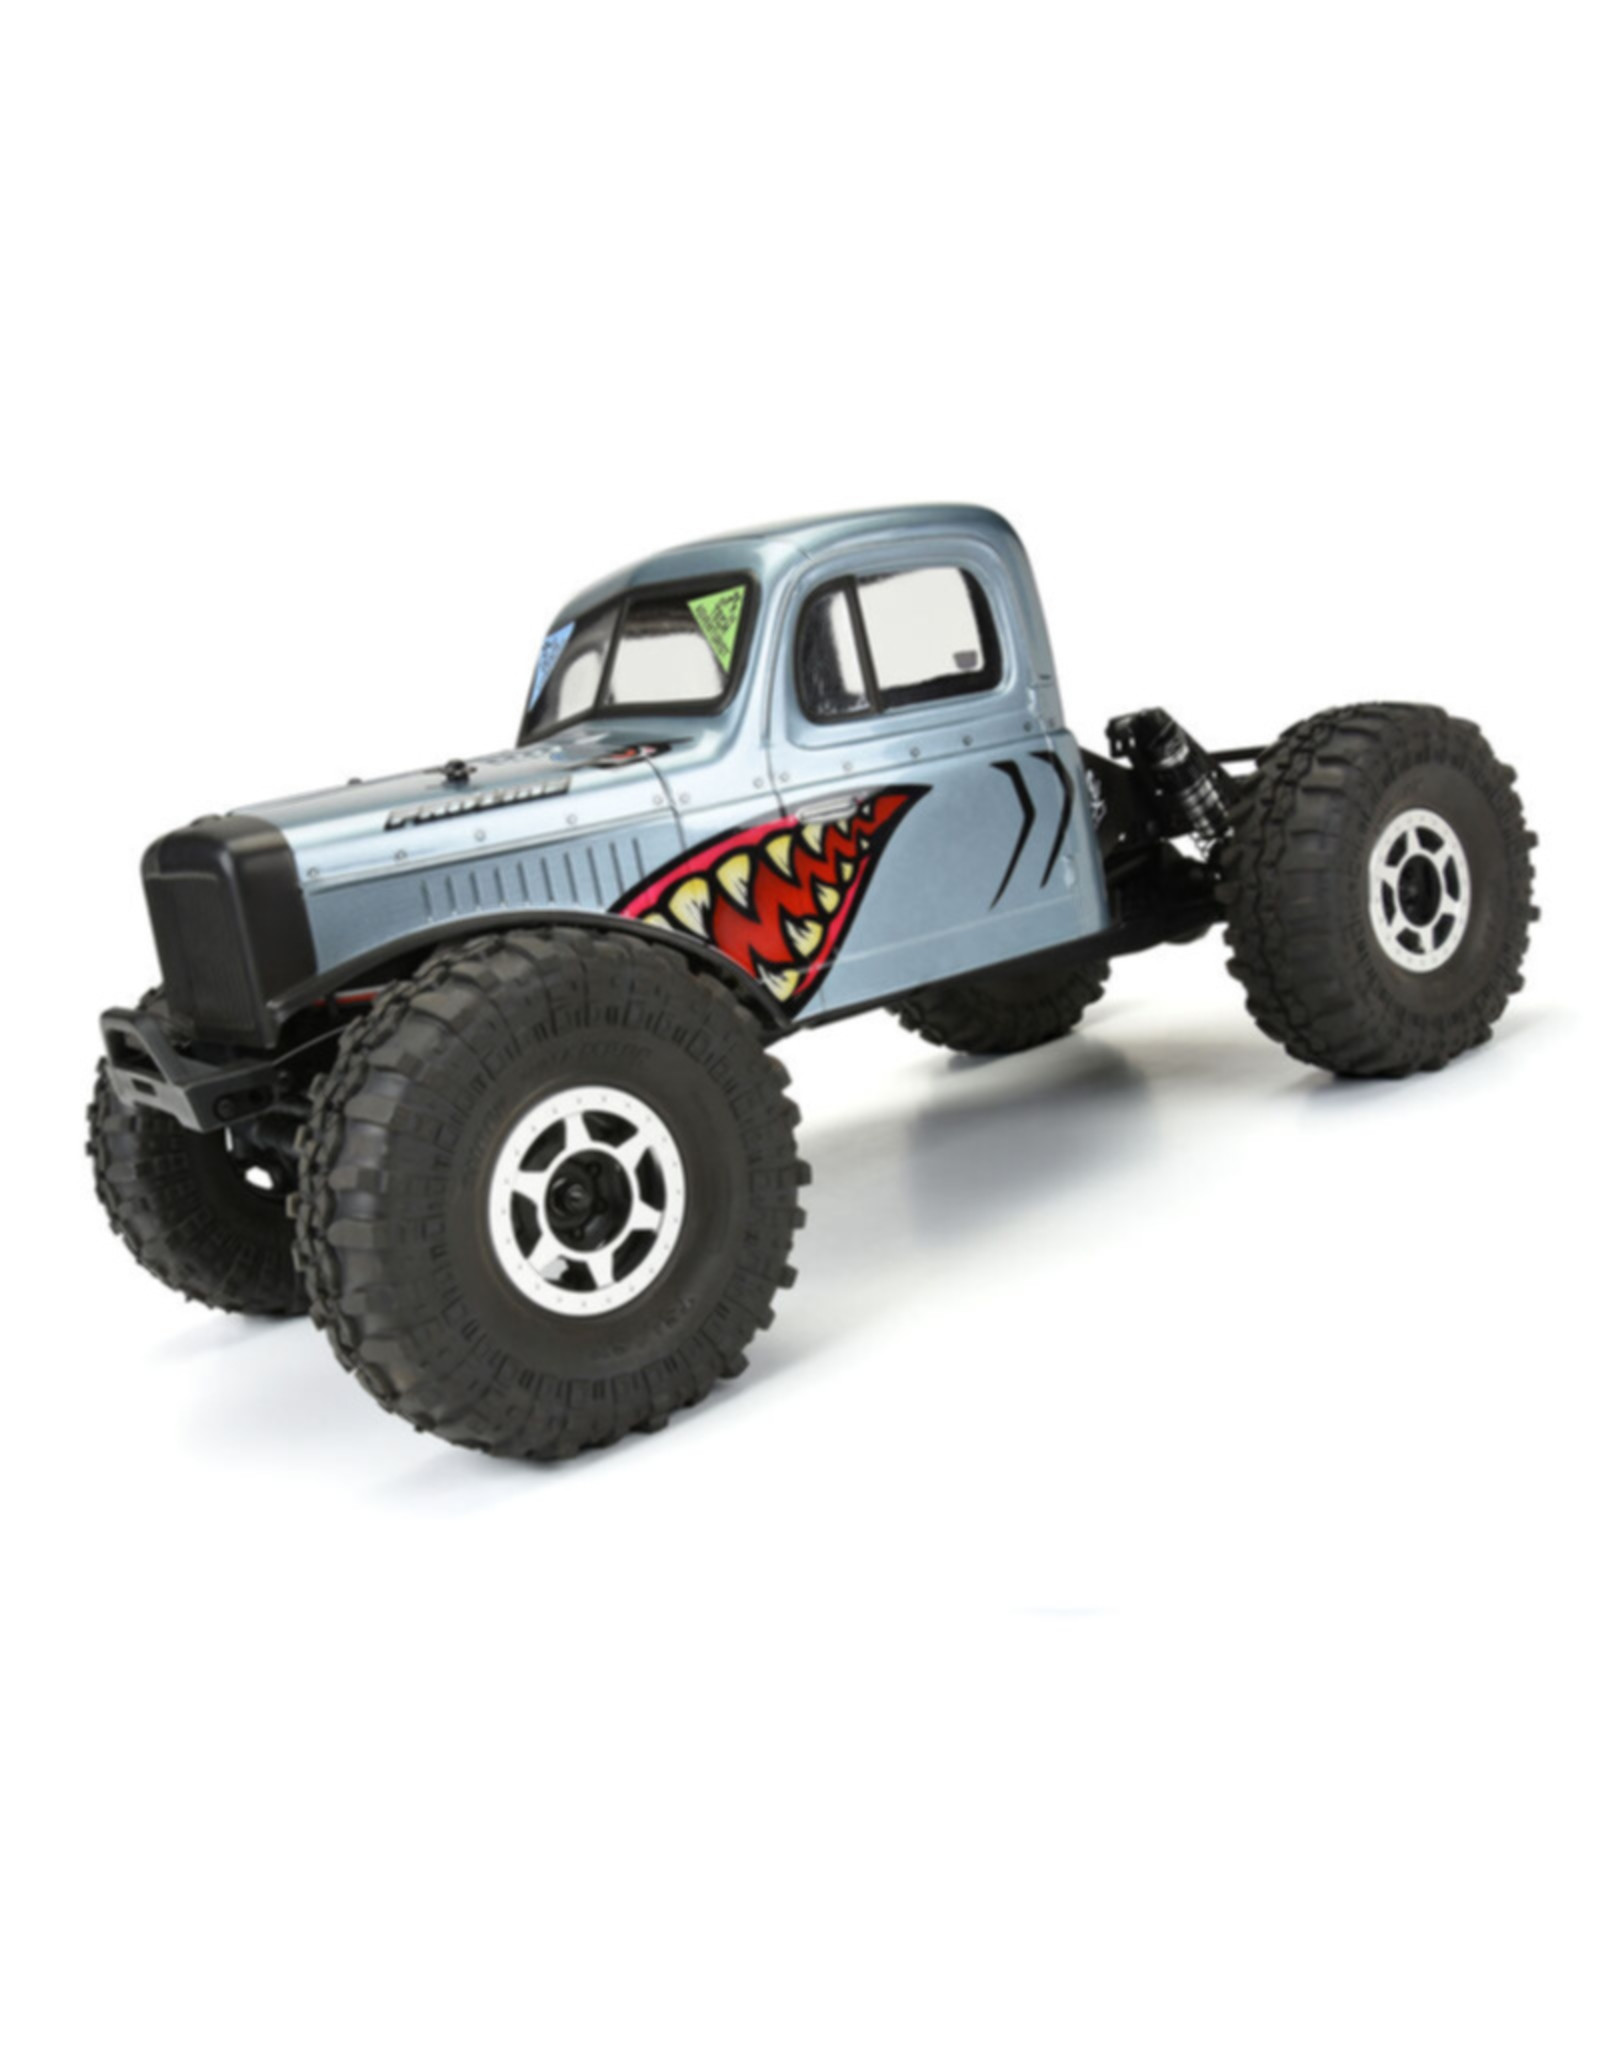 Pro-Line Racing PRO360600 Comp Wagon CabOnly ClrBdy 12.3WB Crwlrs